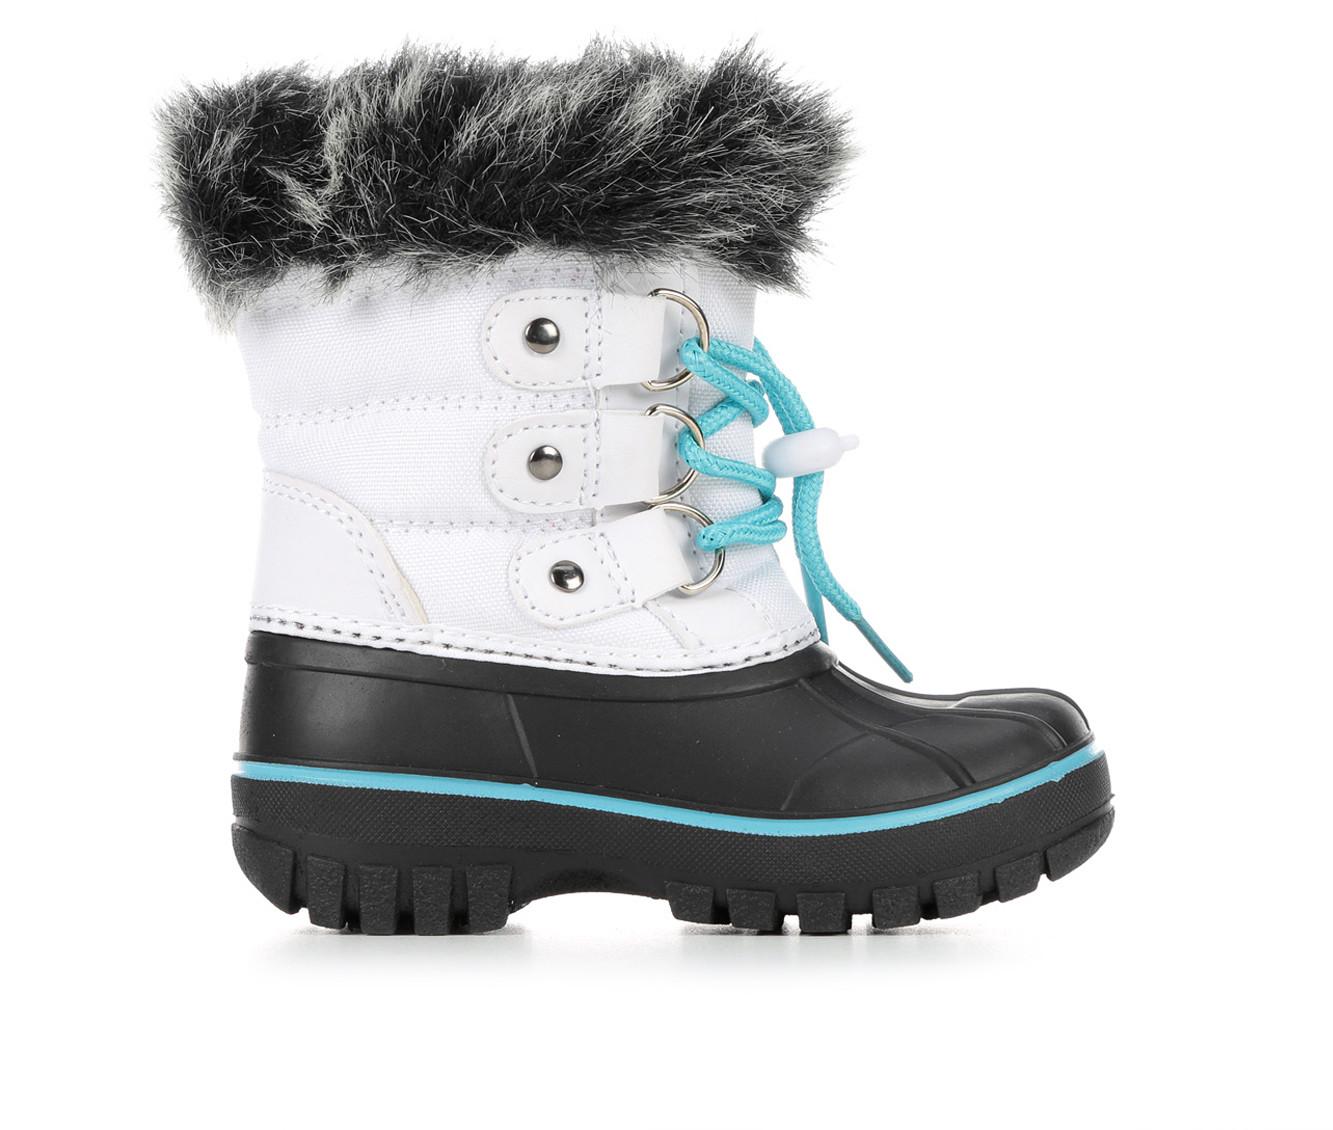 Girls' Itasca Sonoma Toddler Icy II Winter Boots